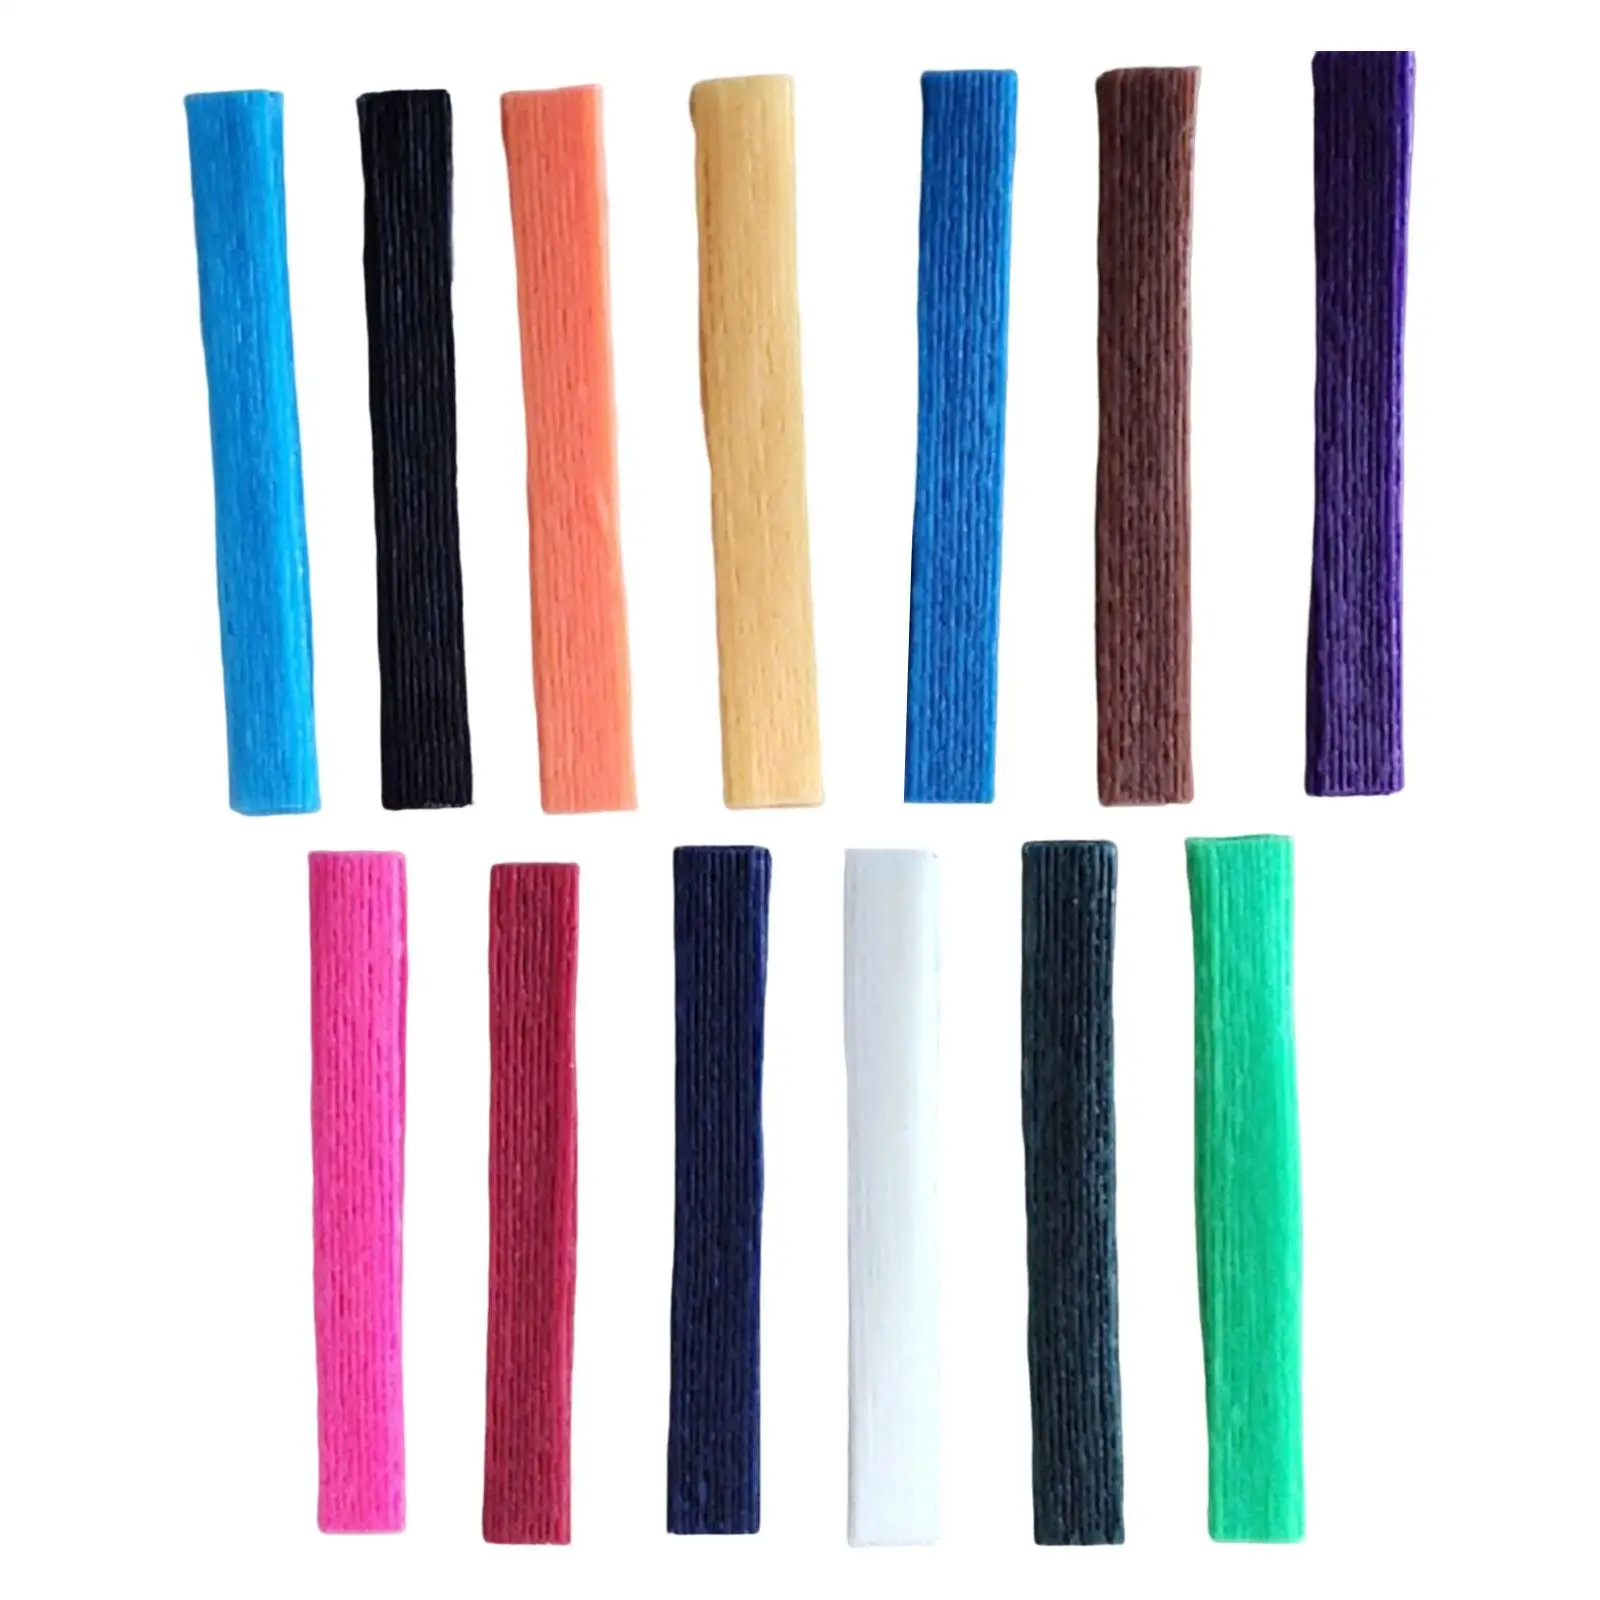 520Pcs Wax Craft Sticks for Kids Bendable Sticky Yarn Wax Sticks for Boys Girls DIY School Project Supplies Travel Mixed Colors